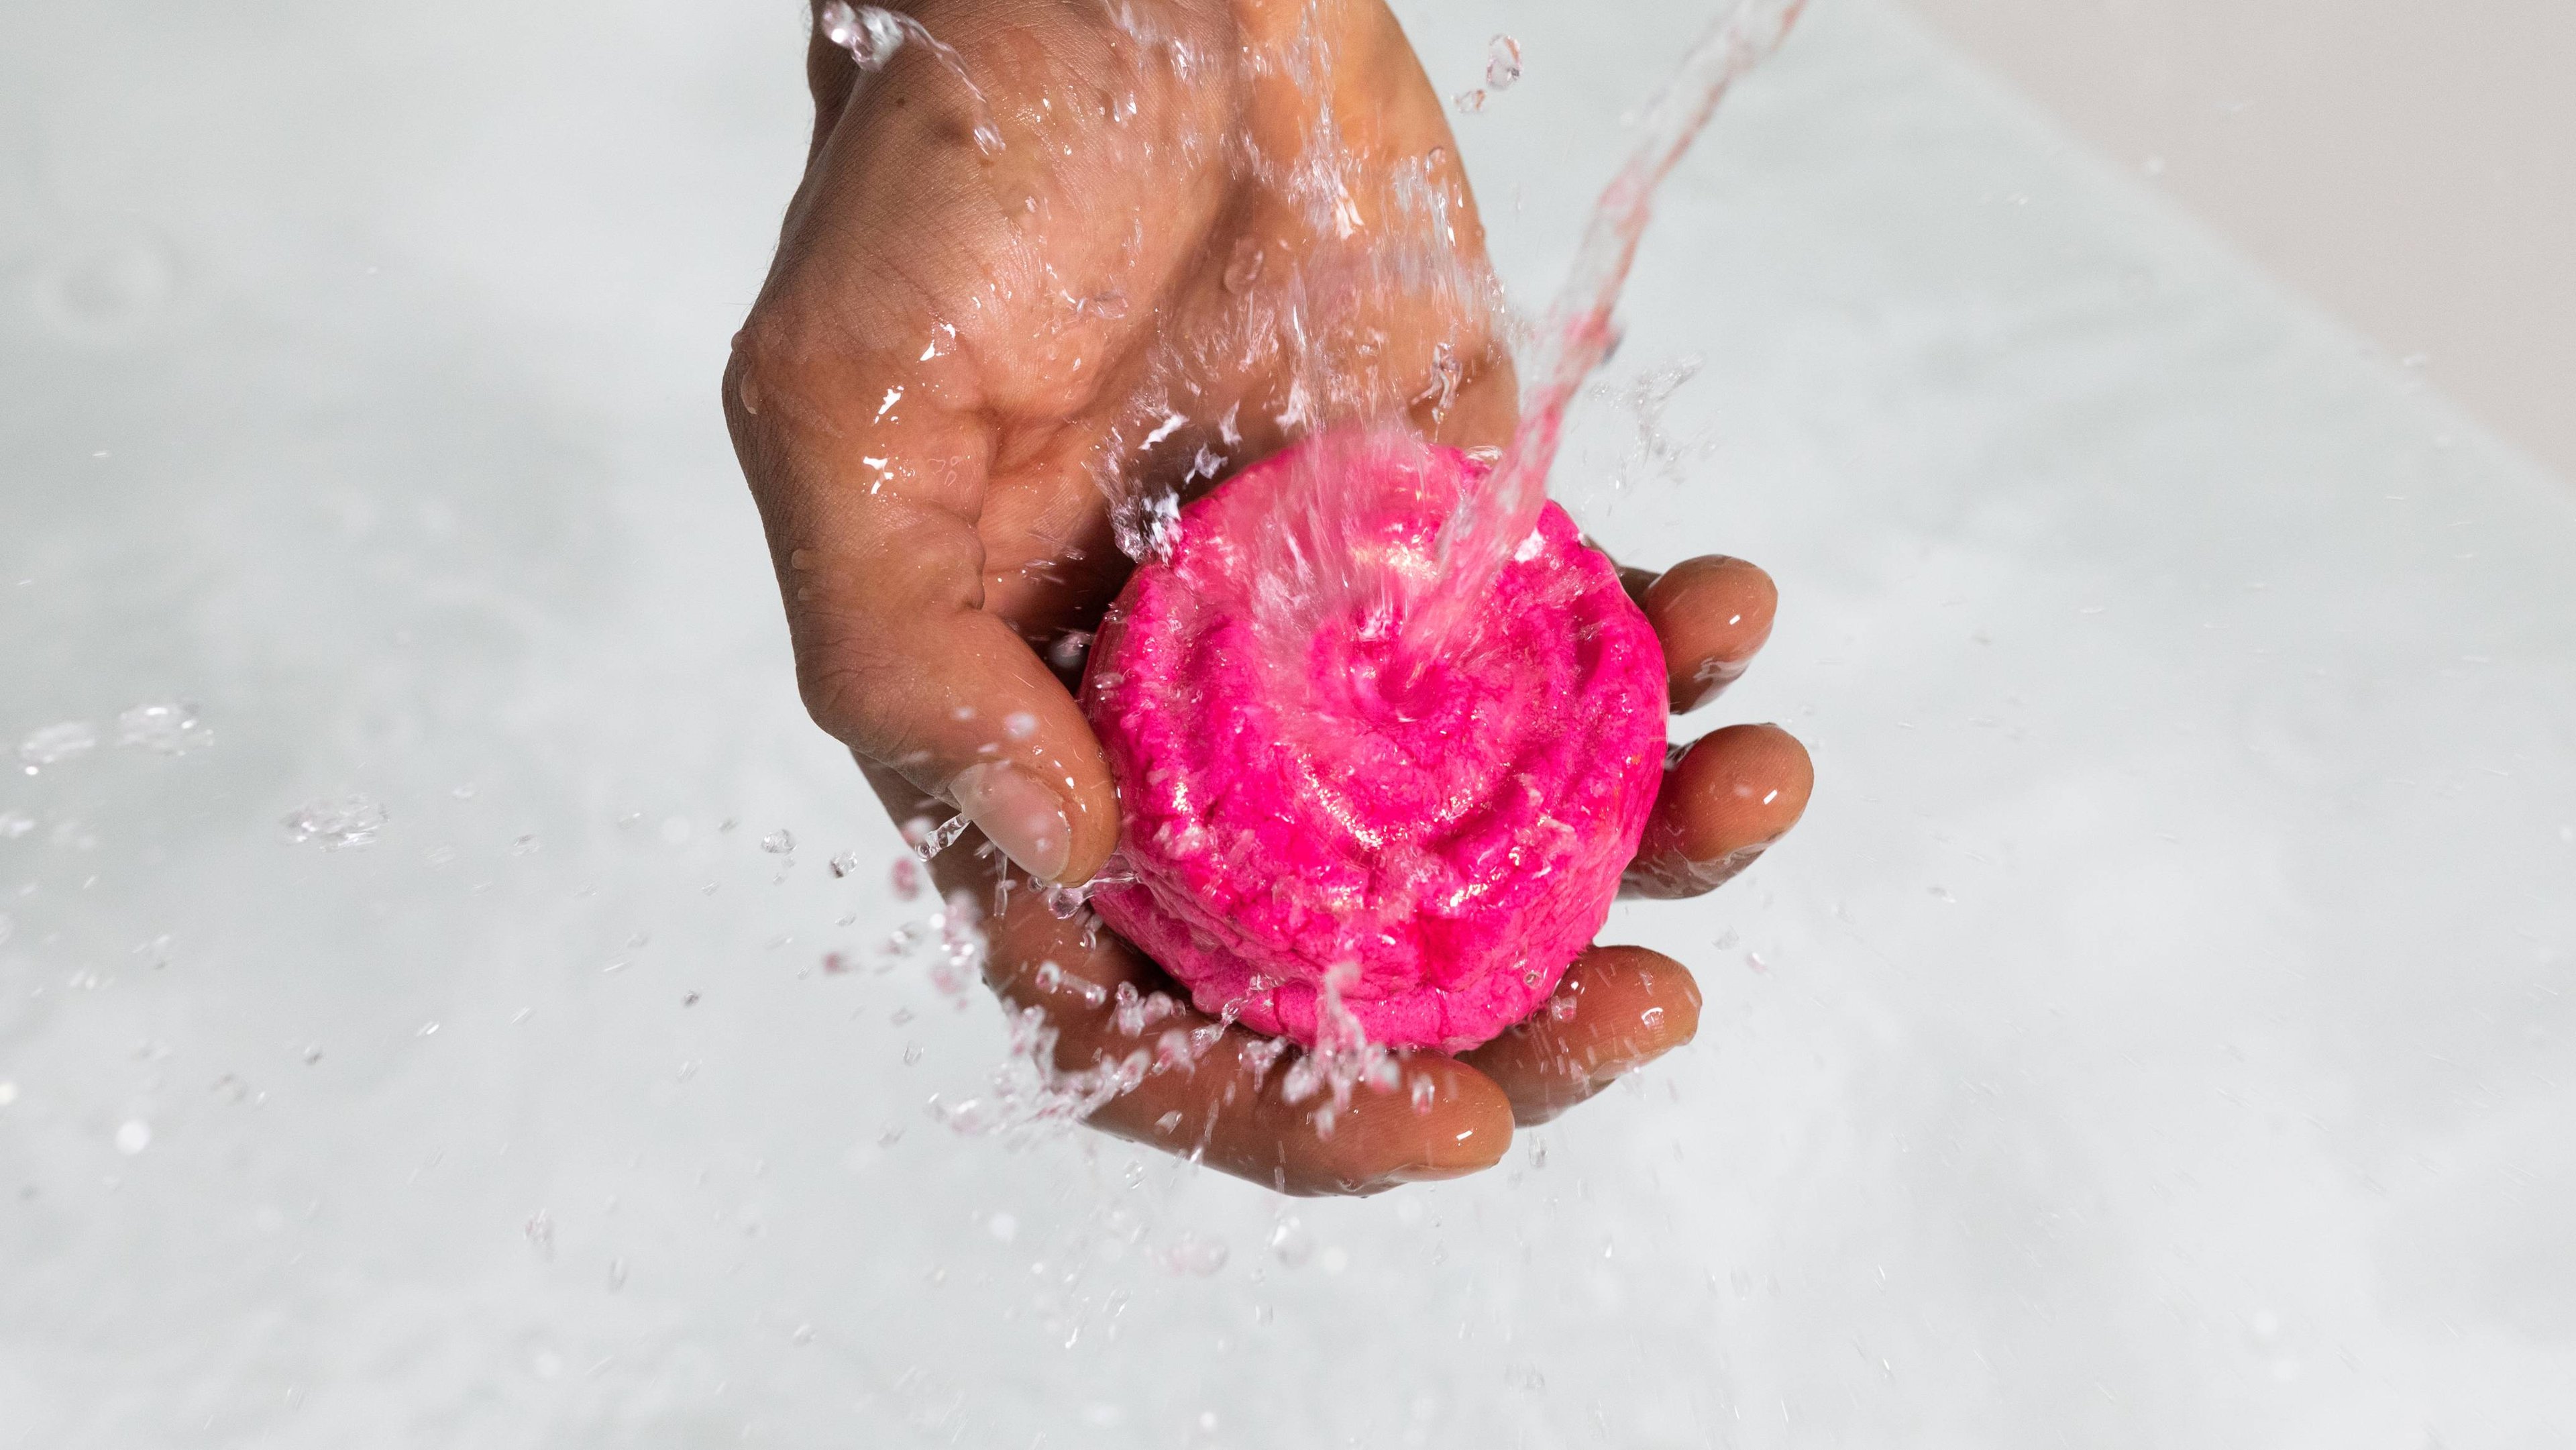 The model holds the sparkly, pink Rose Jam Bubbleroon bubble bar under running water as it flows to create bubbles below.